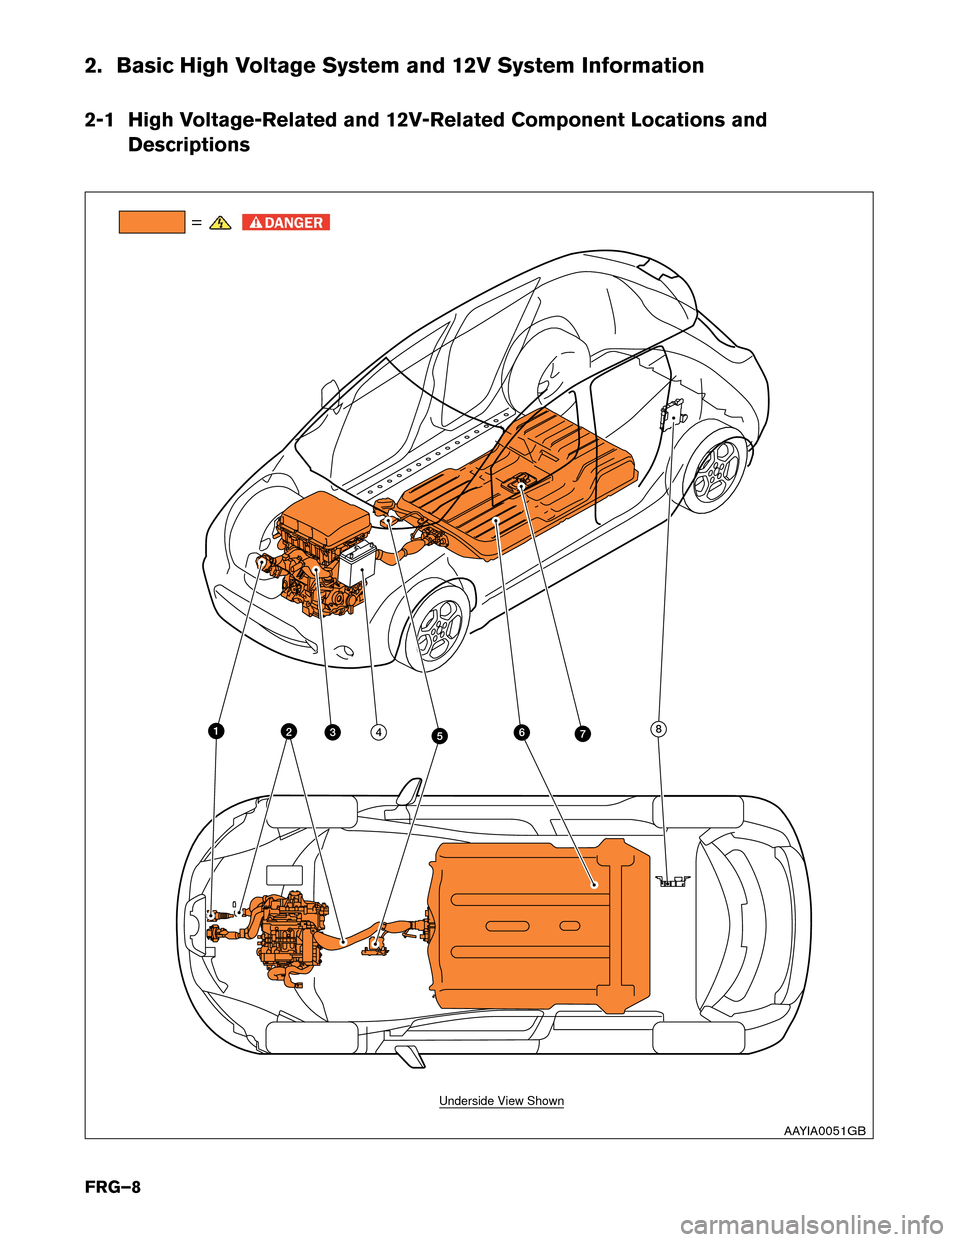 NISSAN LEAF 2014 1.G First Responders Guide 2. Basic High Voltage System and 12V System Information
2-1
High Voltage-Related and 12V-Related Component Locations and
Descriptions =
76
342 8
5 1
Underside View Shown
AAYIA0051GB
FRG–8  